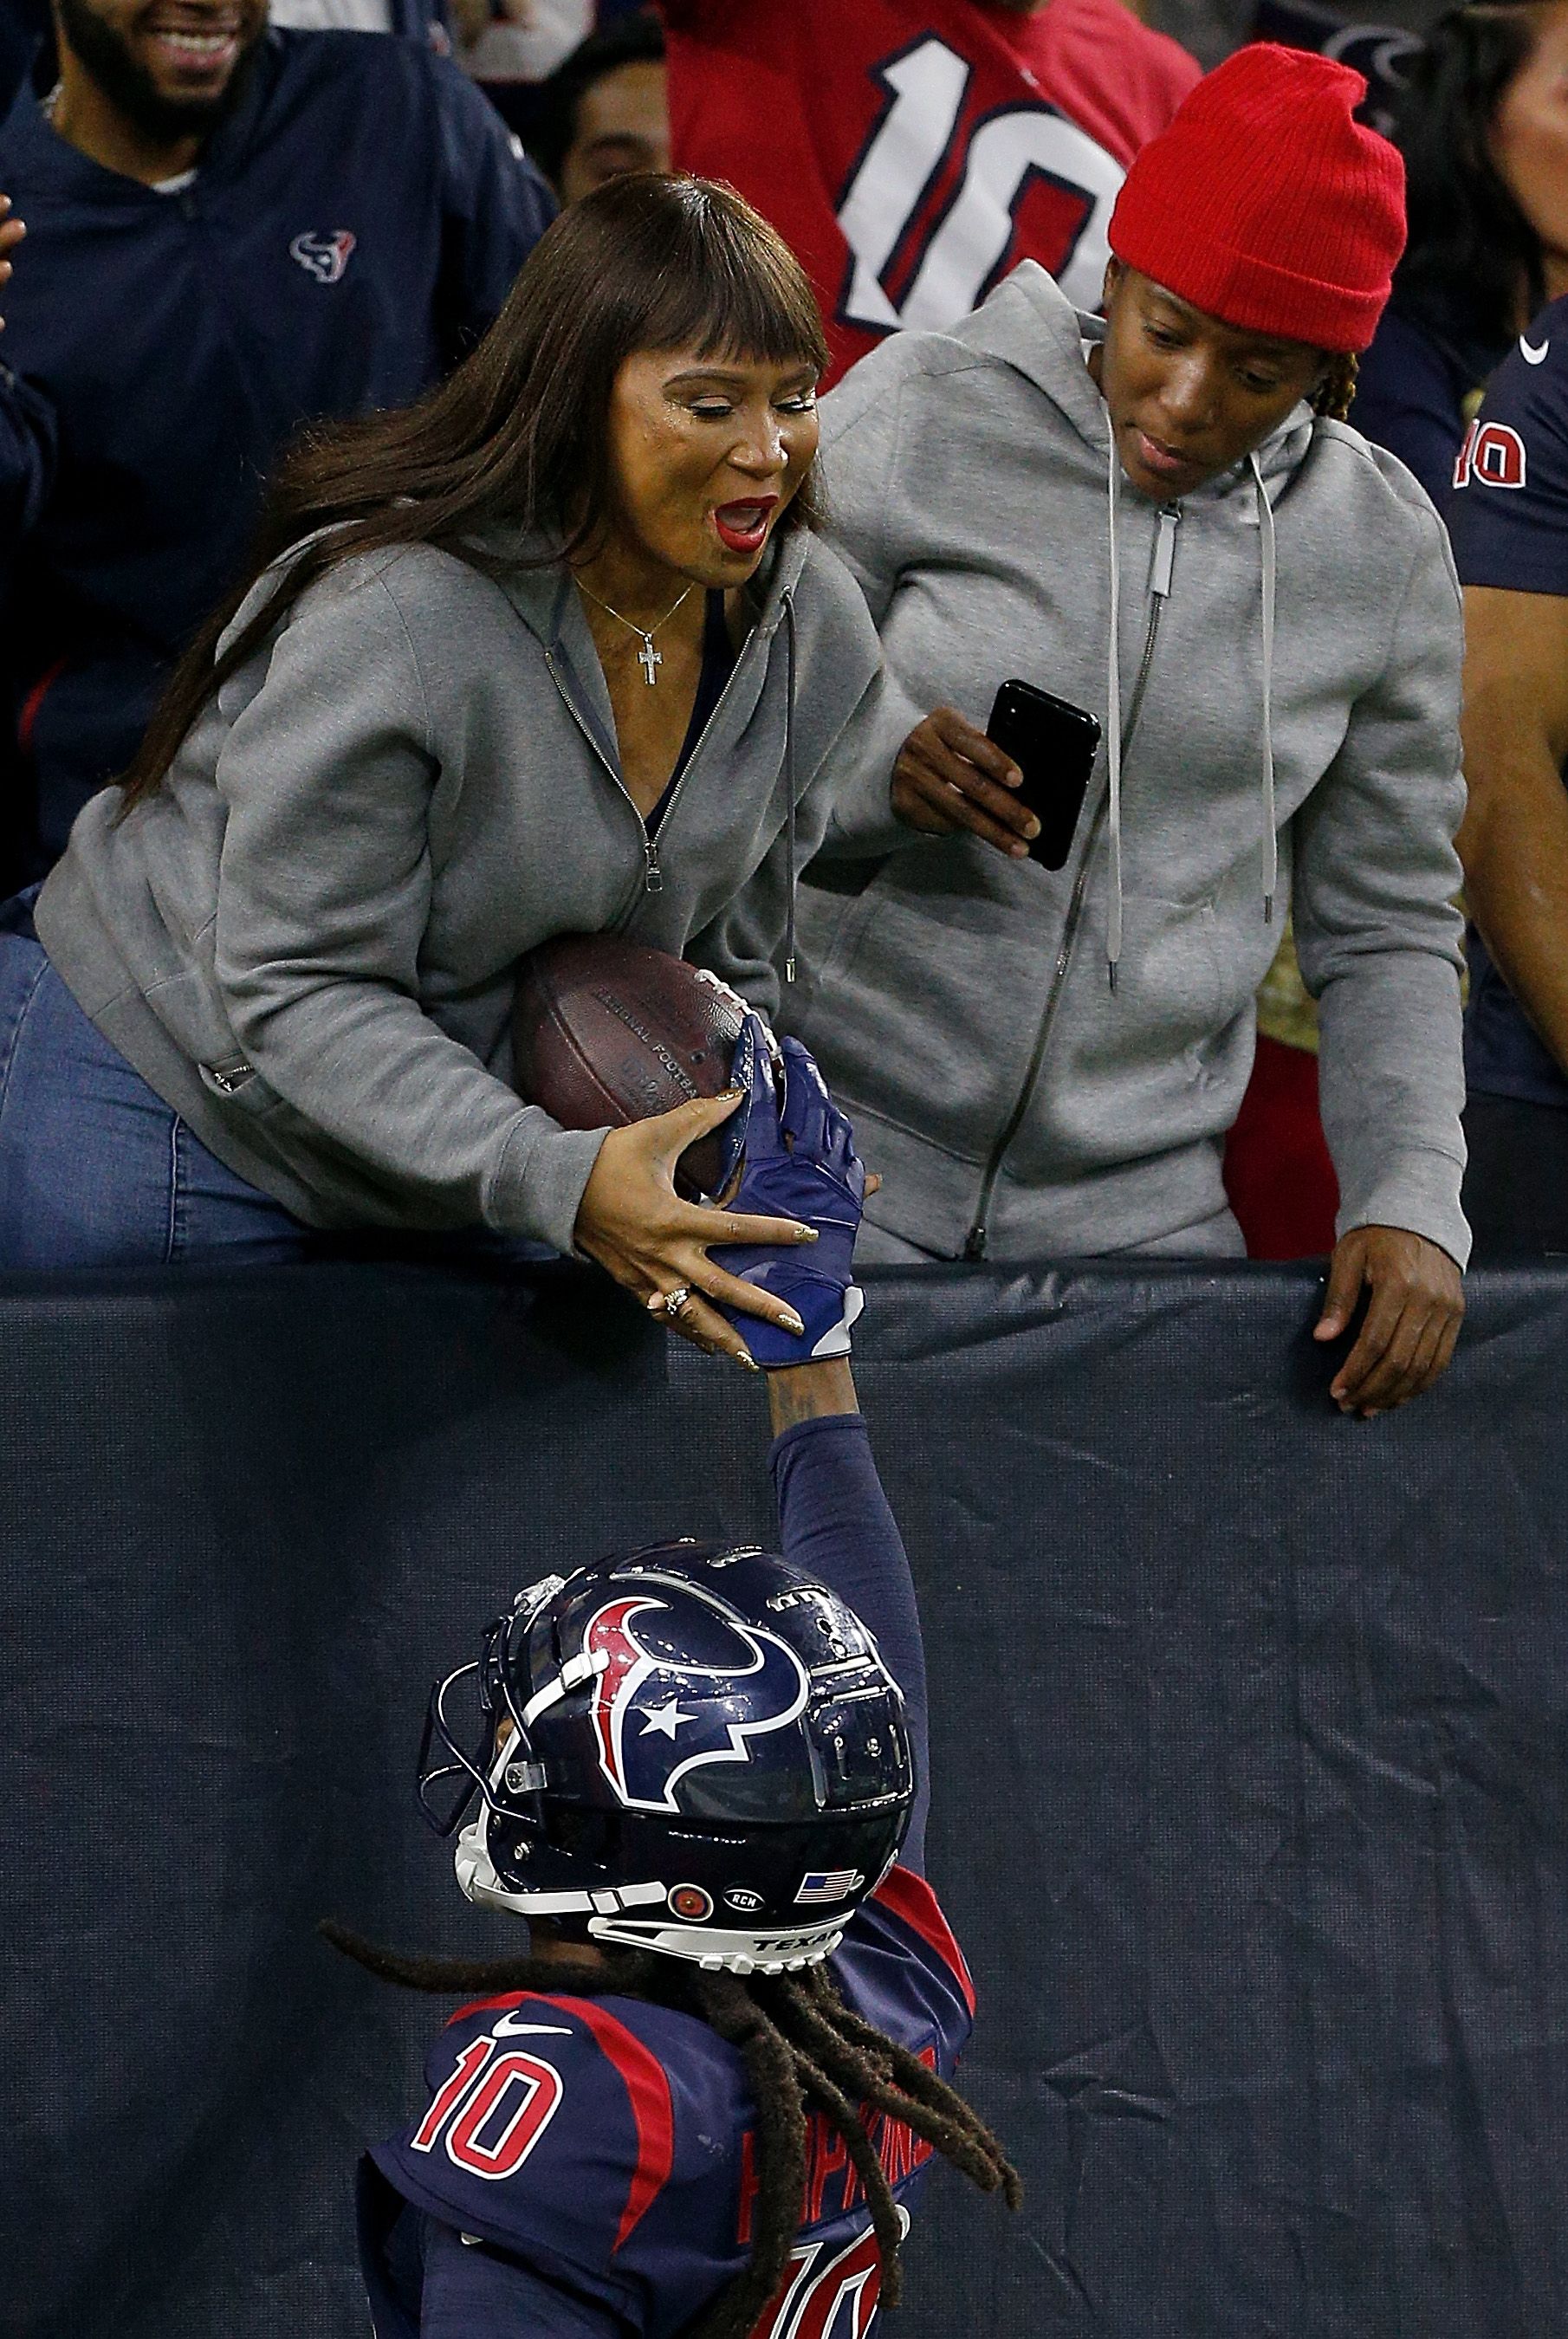  DeAndre Hopkins handing the ball to his mother, Sabrina Greenlee after a touchdown in November 21, 2019 in Houston, Texas | Source: Getty Images